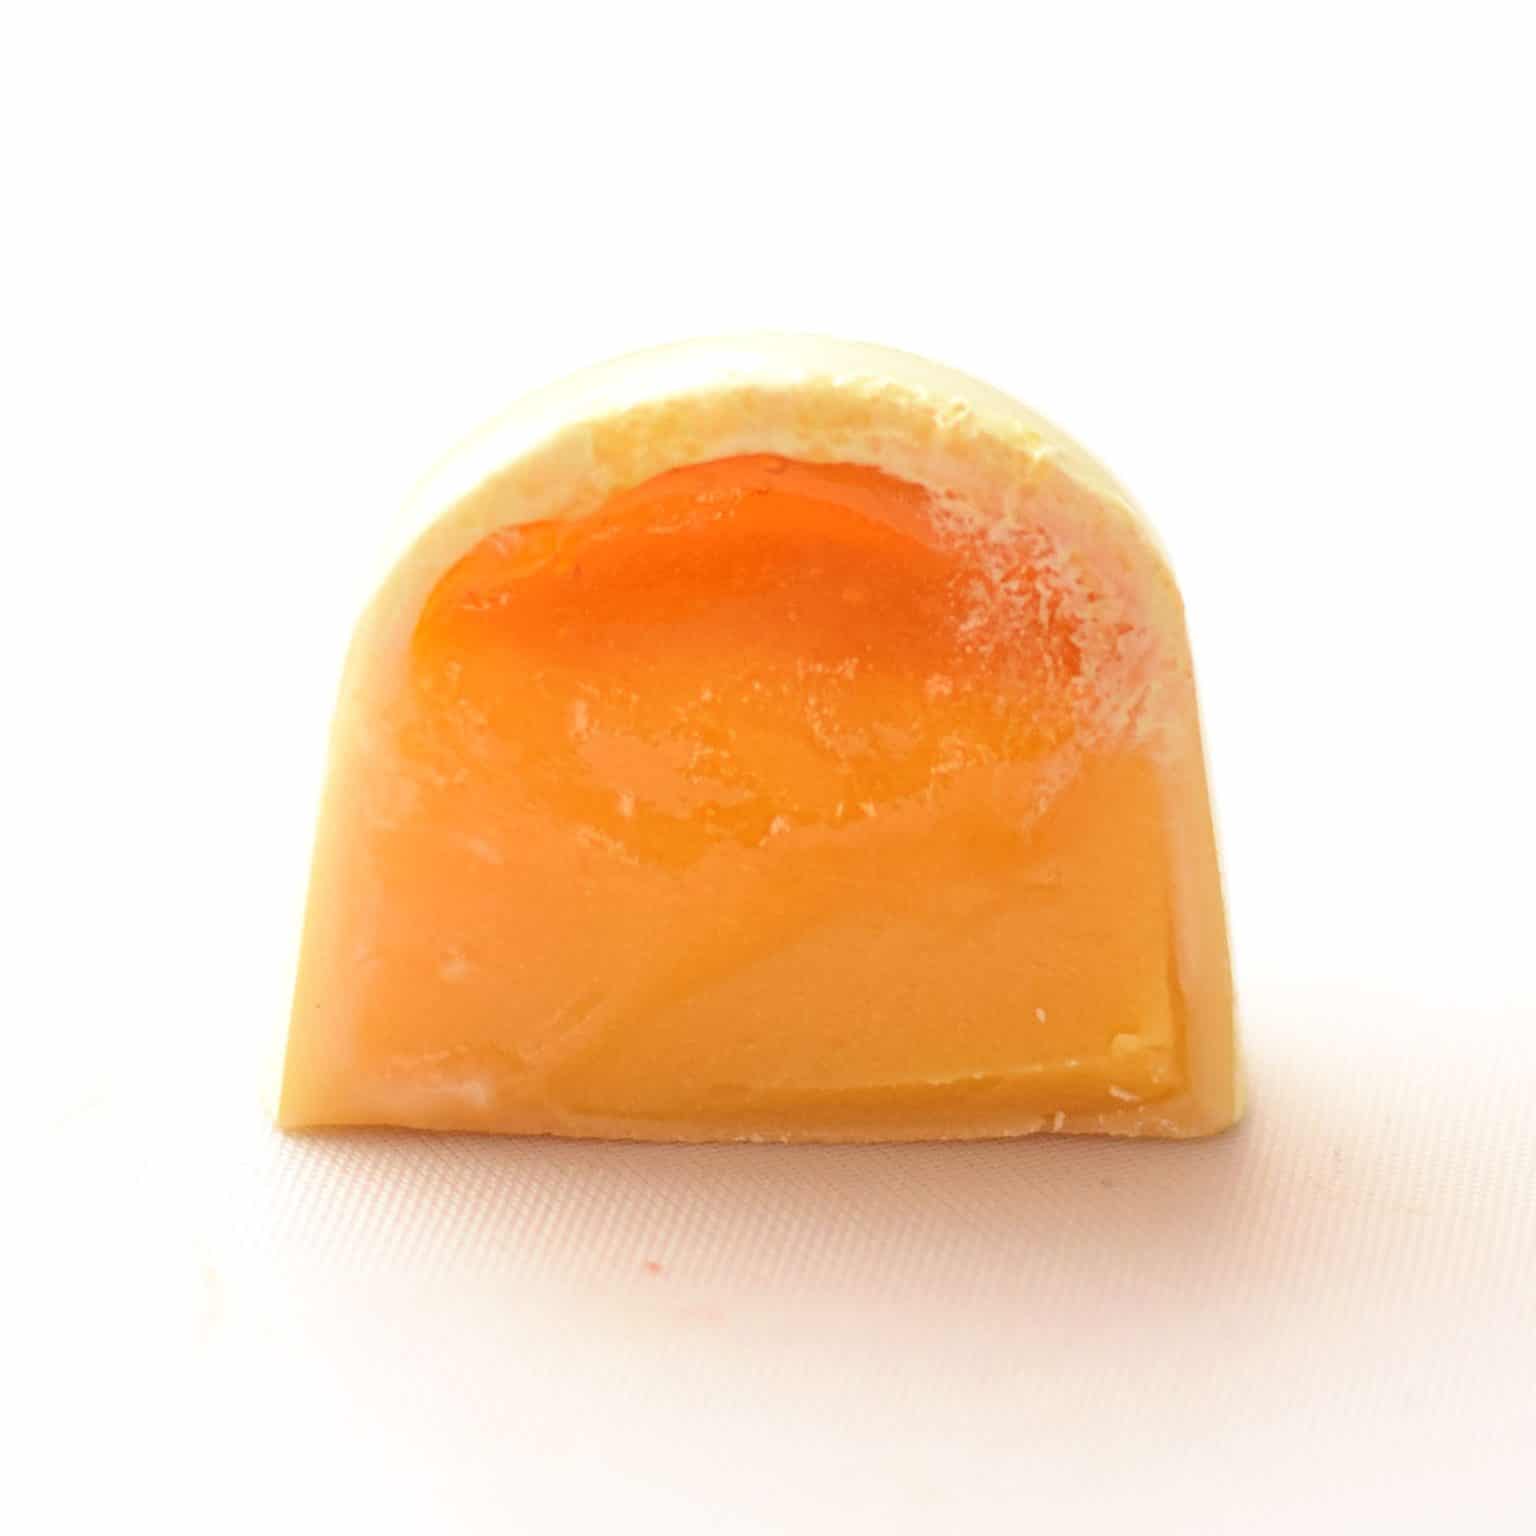 Inside view of a gourmet white chocolate truffle that contains a thick layer of passion fruit ganache and a thin layer of passion fruit jelly